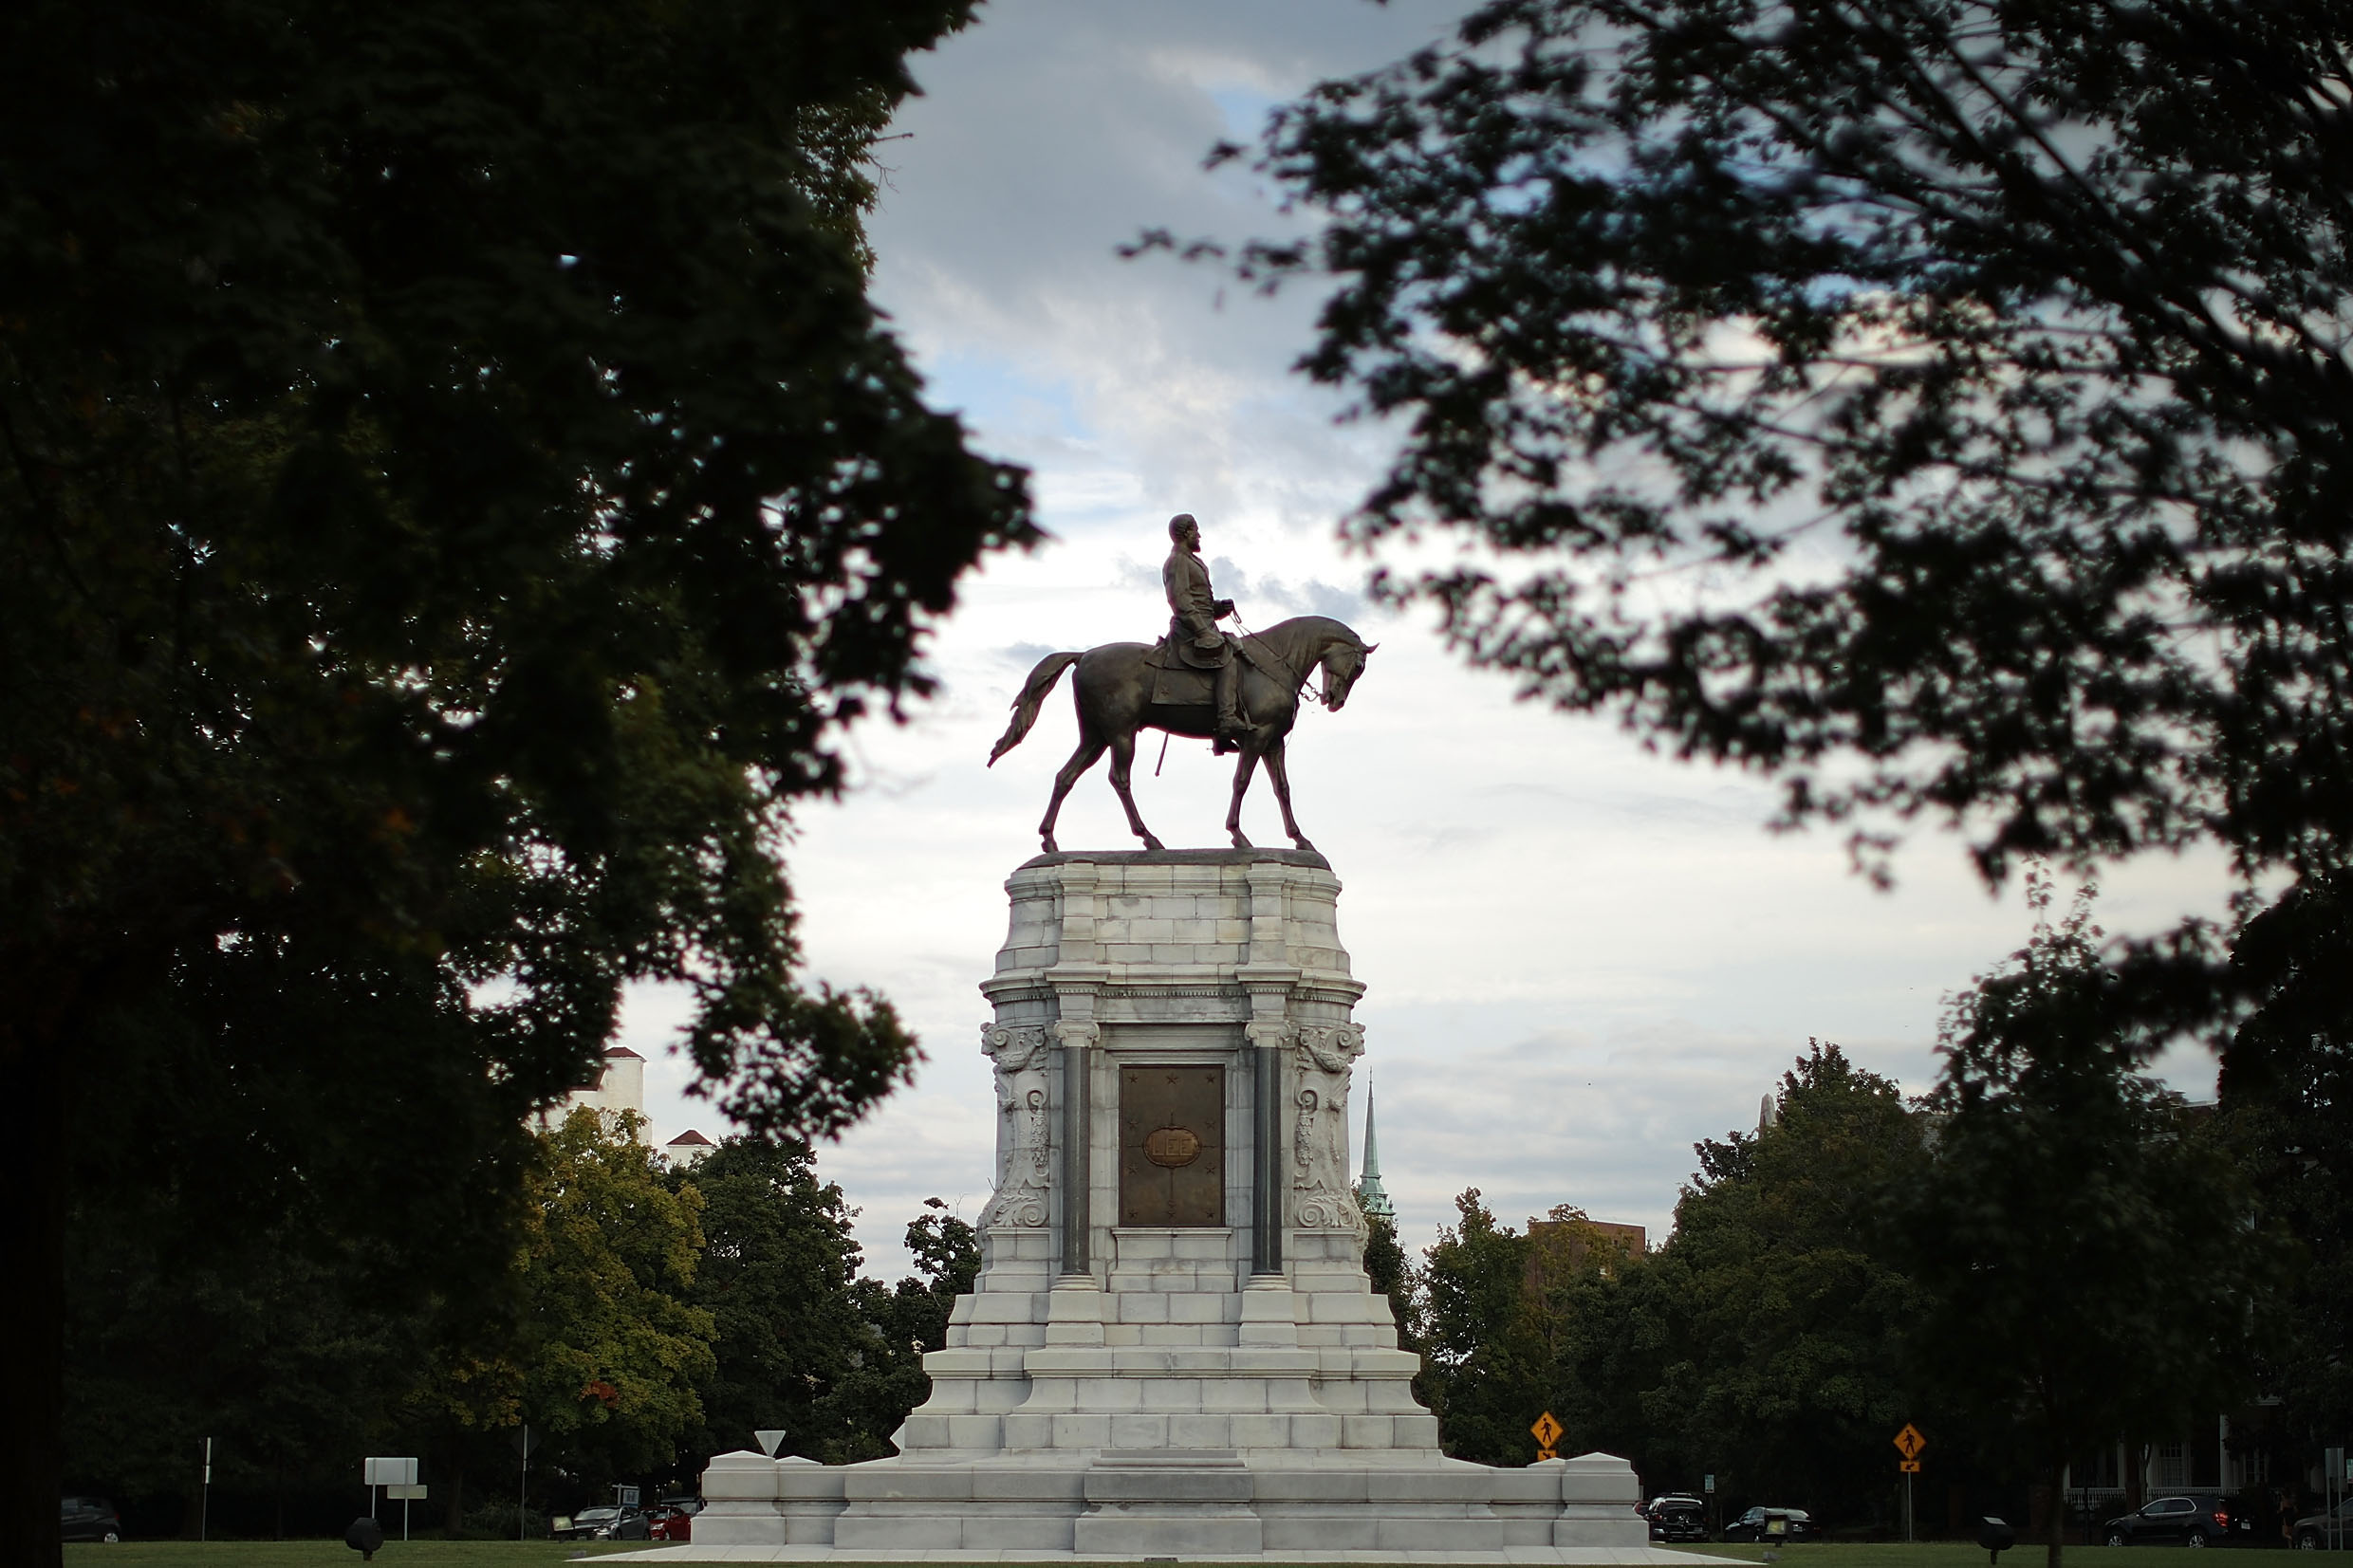 A statue of Confederate General Robert E. Lee, unveild in 1890, stands at the center of Lee Circle along Monument Avenue August 23, 2017 in Richmond, Virginia. (Chip Somodevilla—Getty Images)